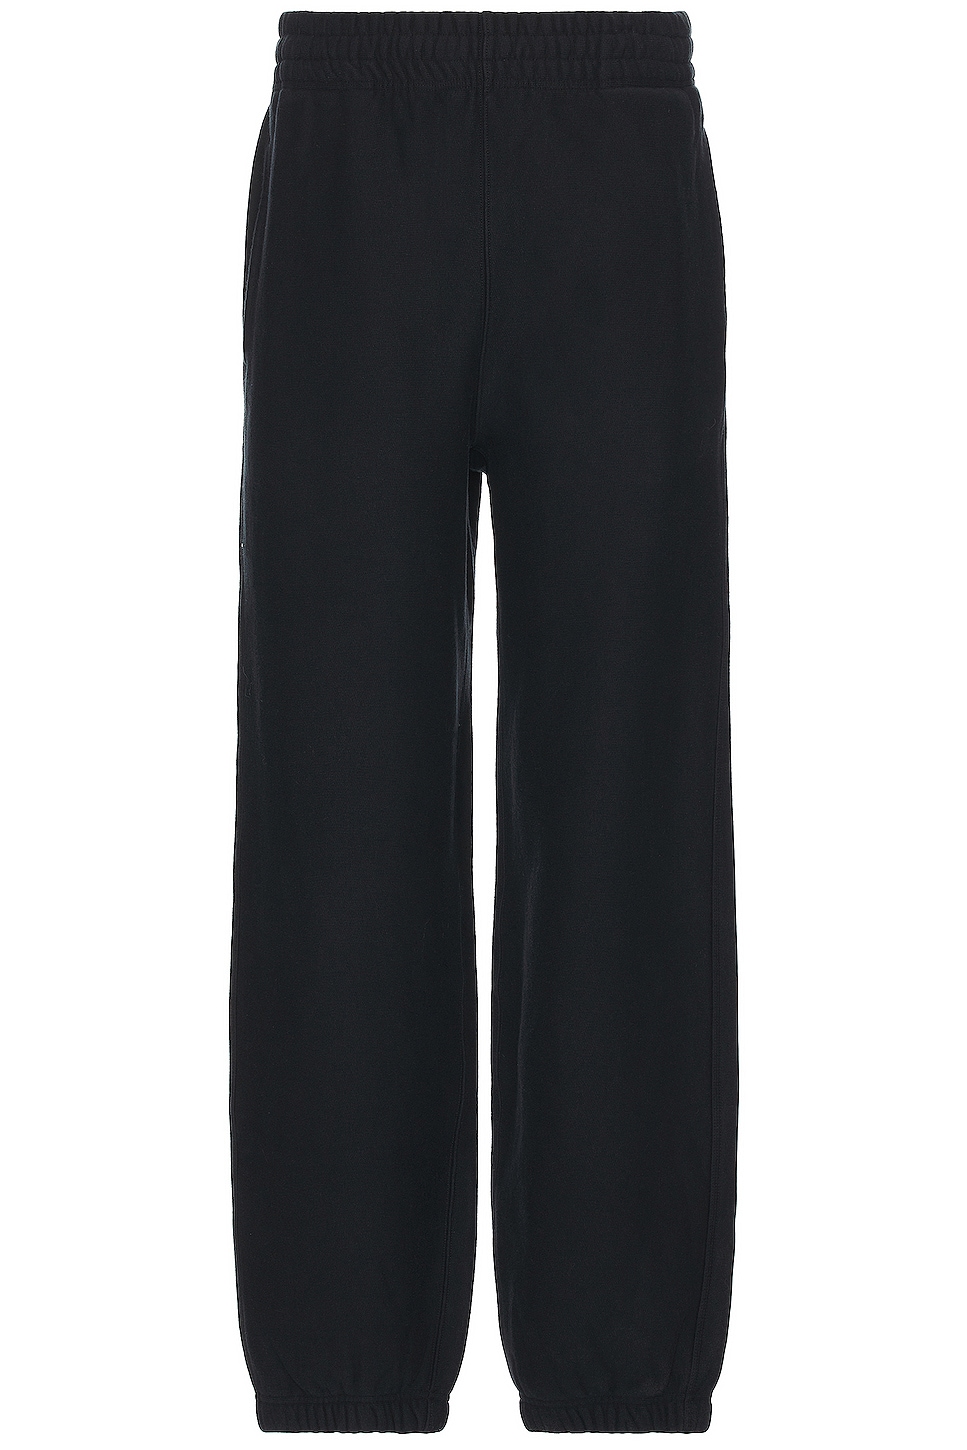 Image 1 of Burberry Basic Sweat Pant in Black